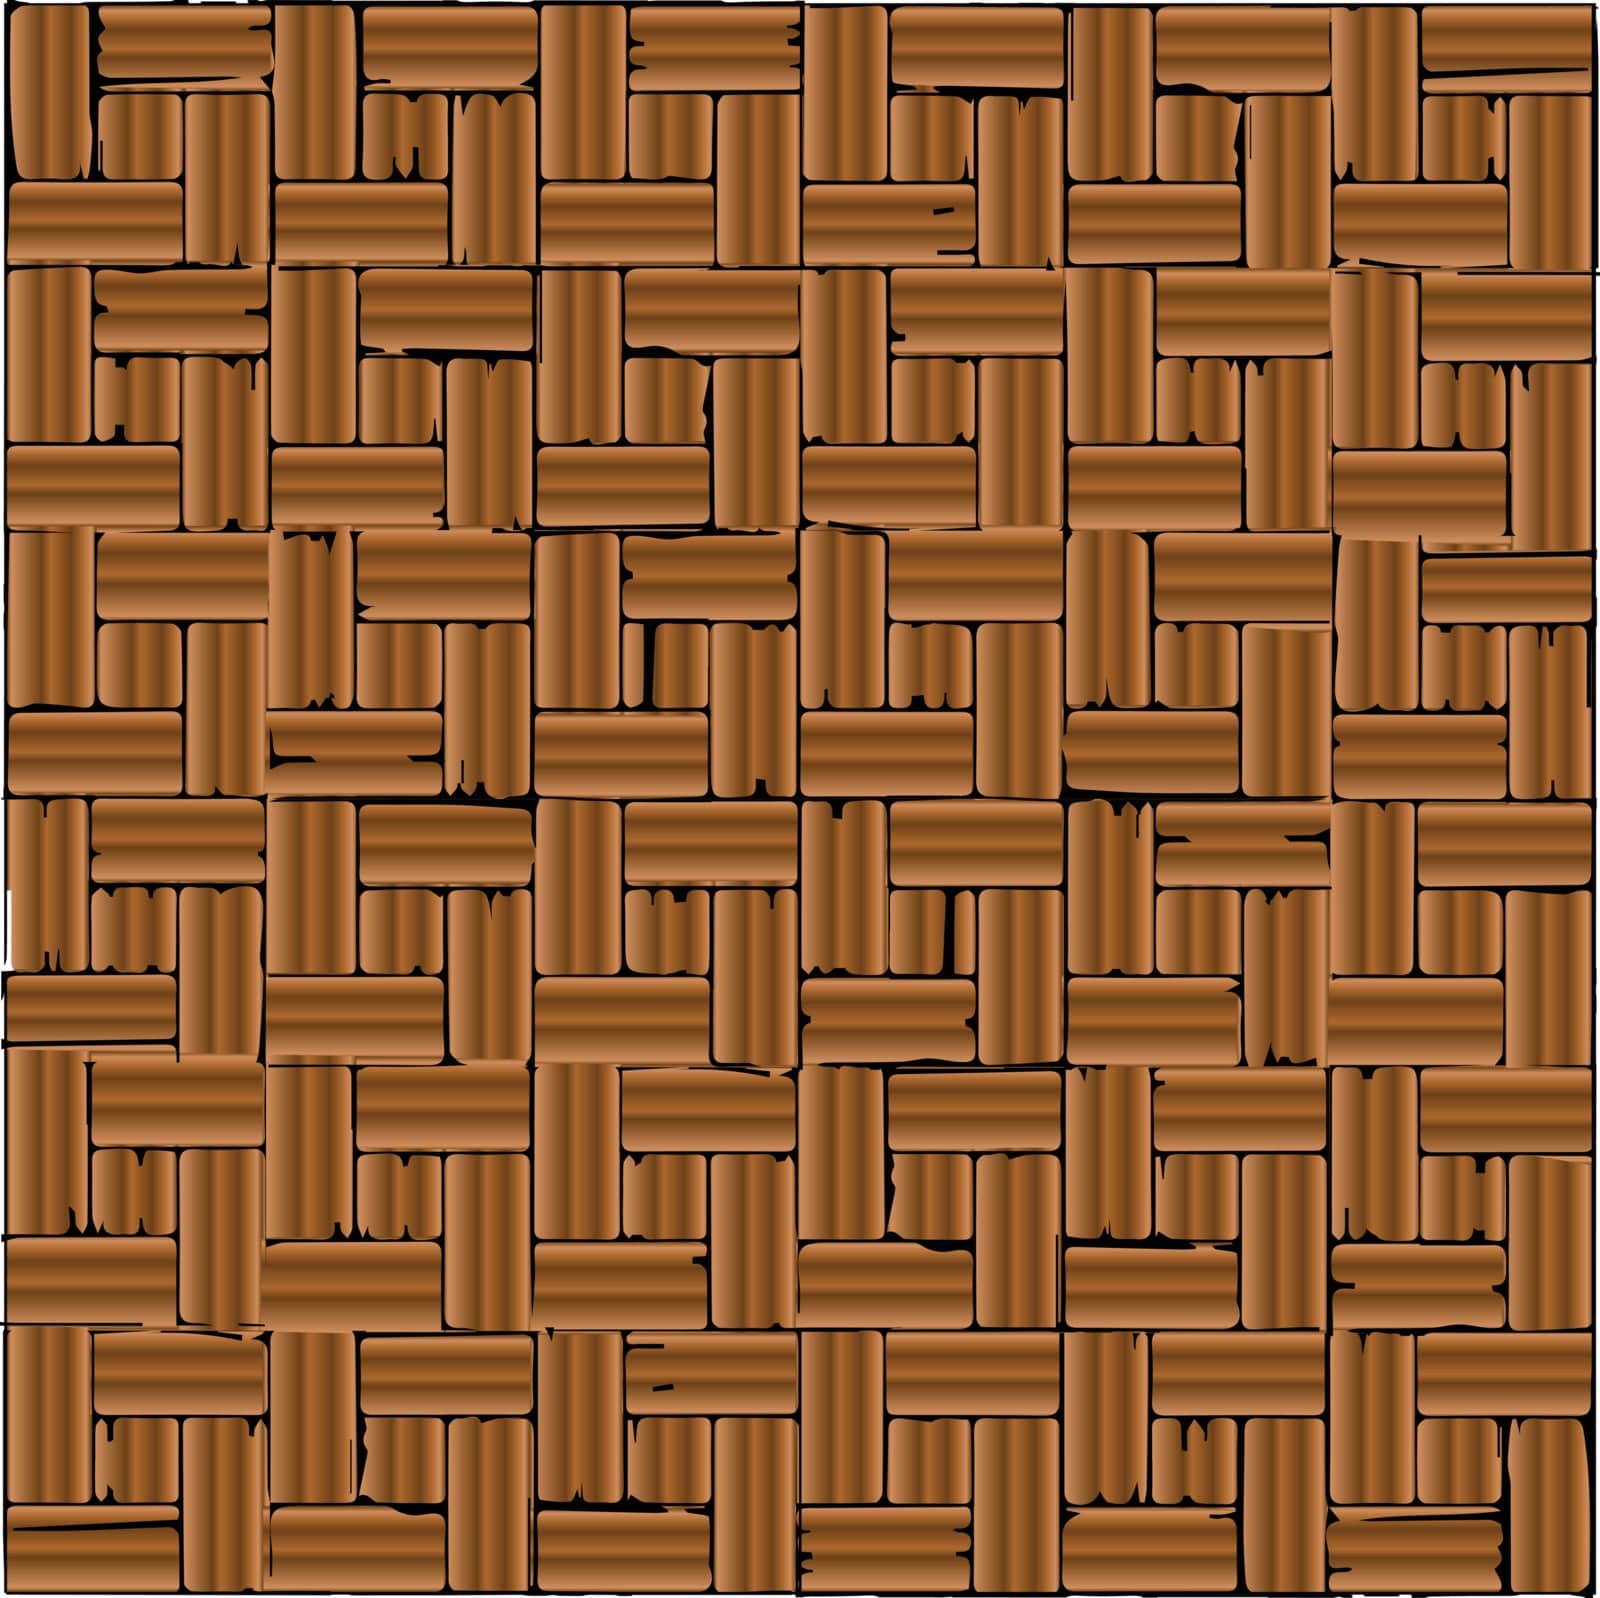 A red brick parquet flooring pattern as a background.